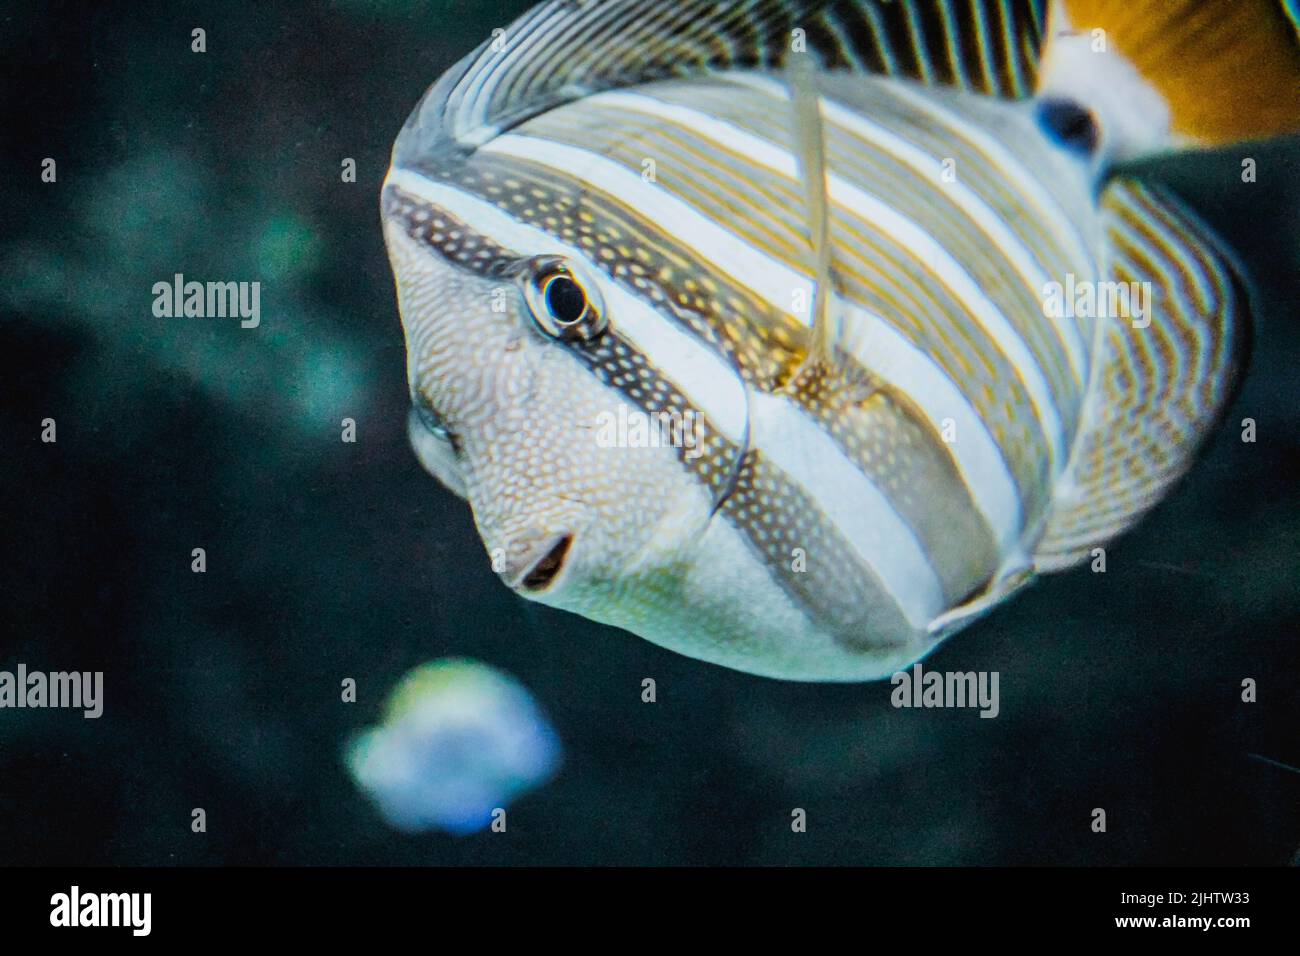 Underwater cute tropical fish looking at camera, Curious colorful tropical fish with black background. Coral reef fish head detail with face looking i Stock Photo